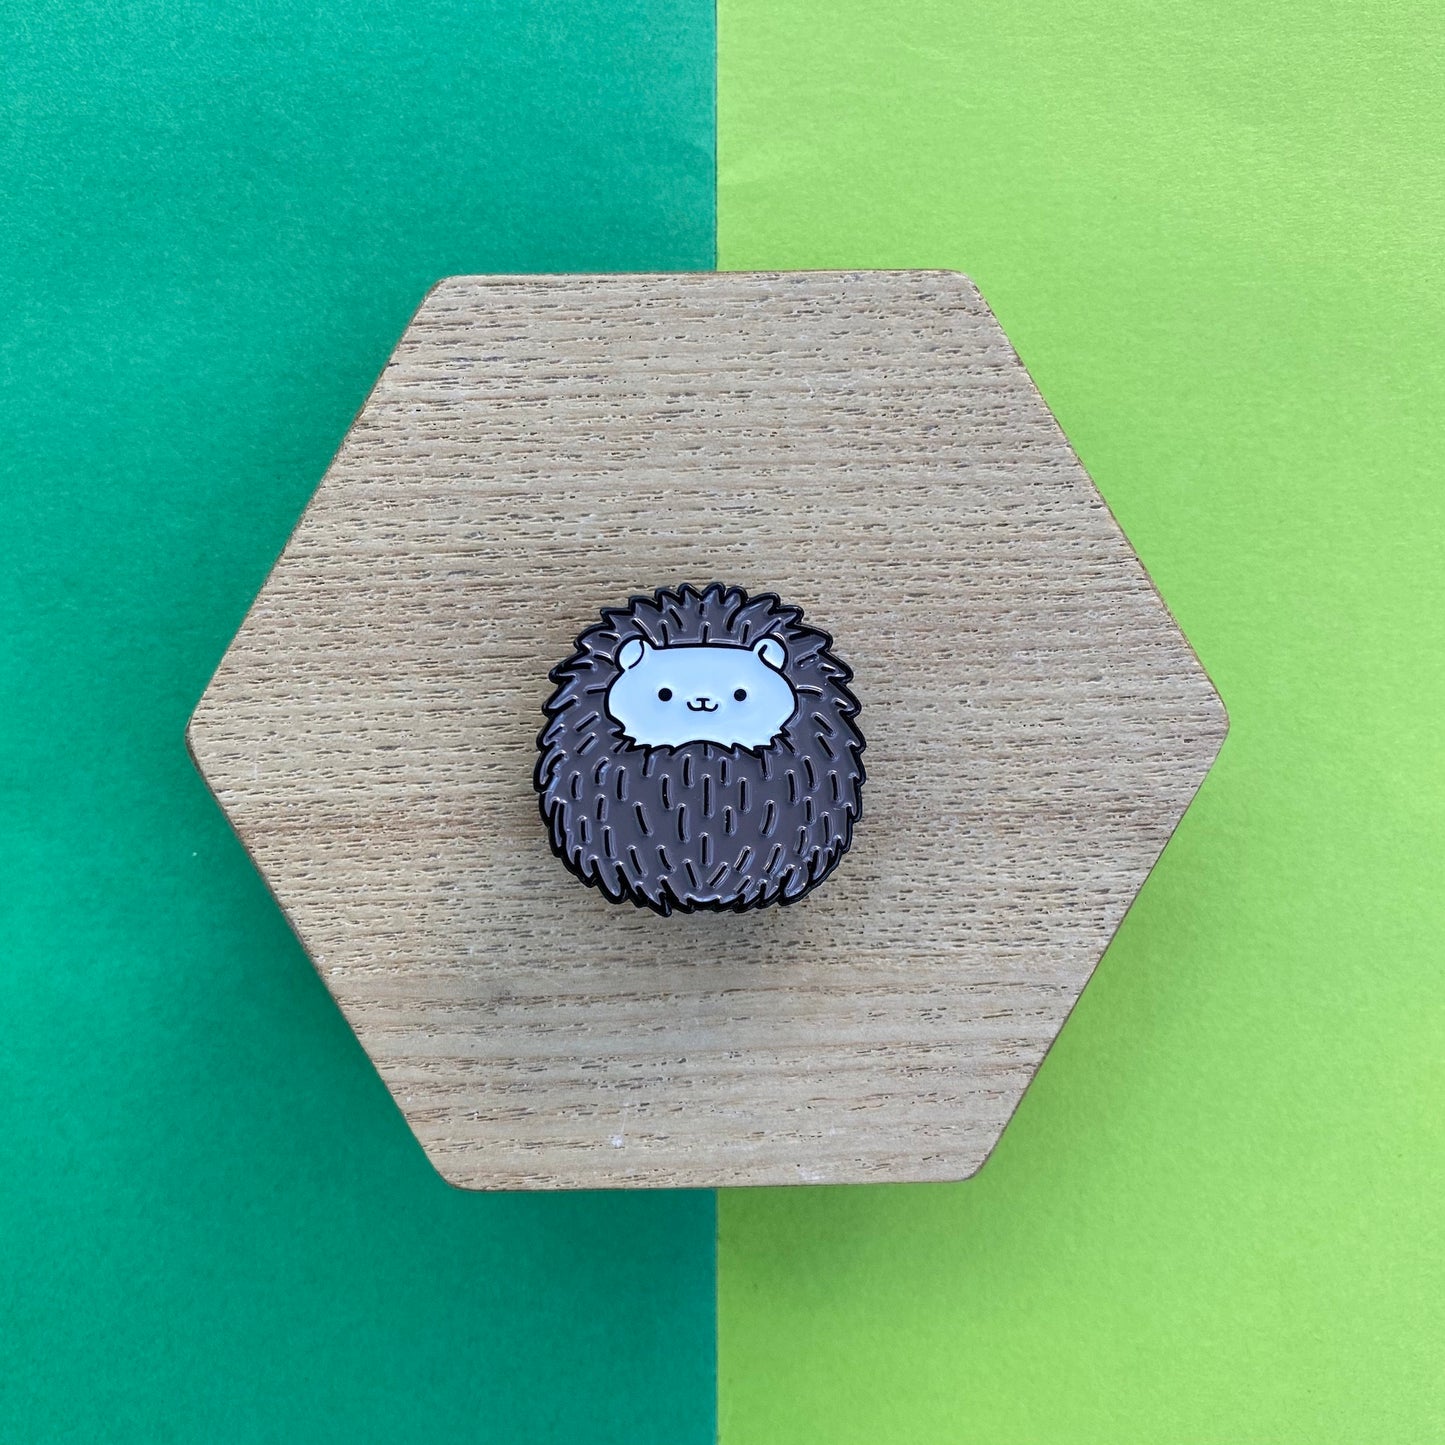 Hector the Hedgehog Enamel Pin - thehappypin